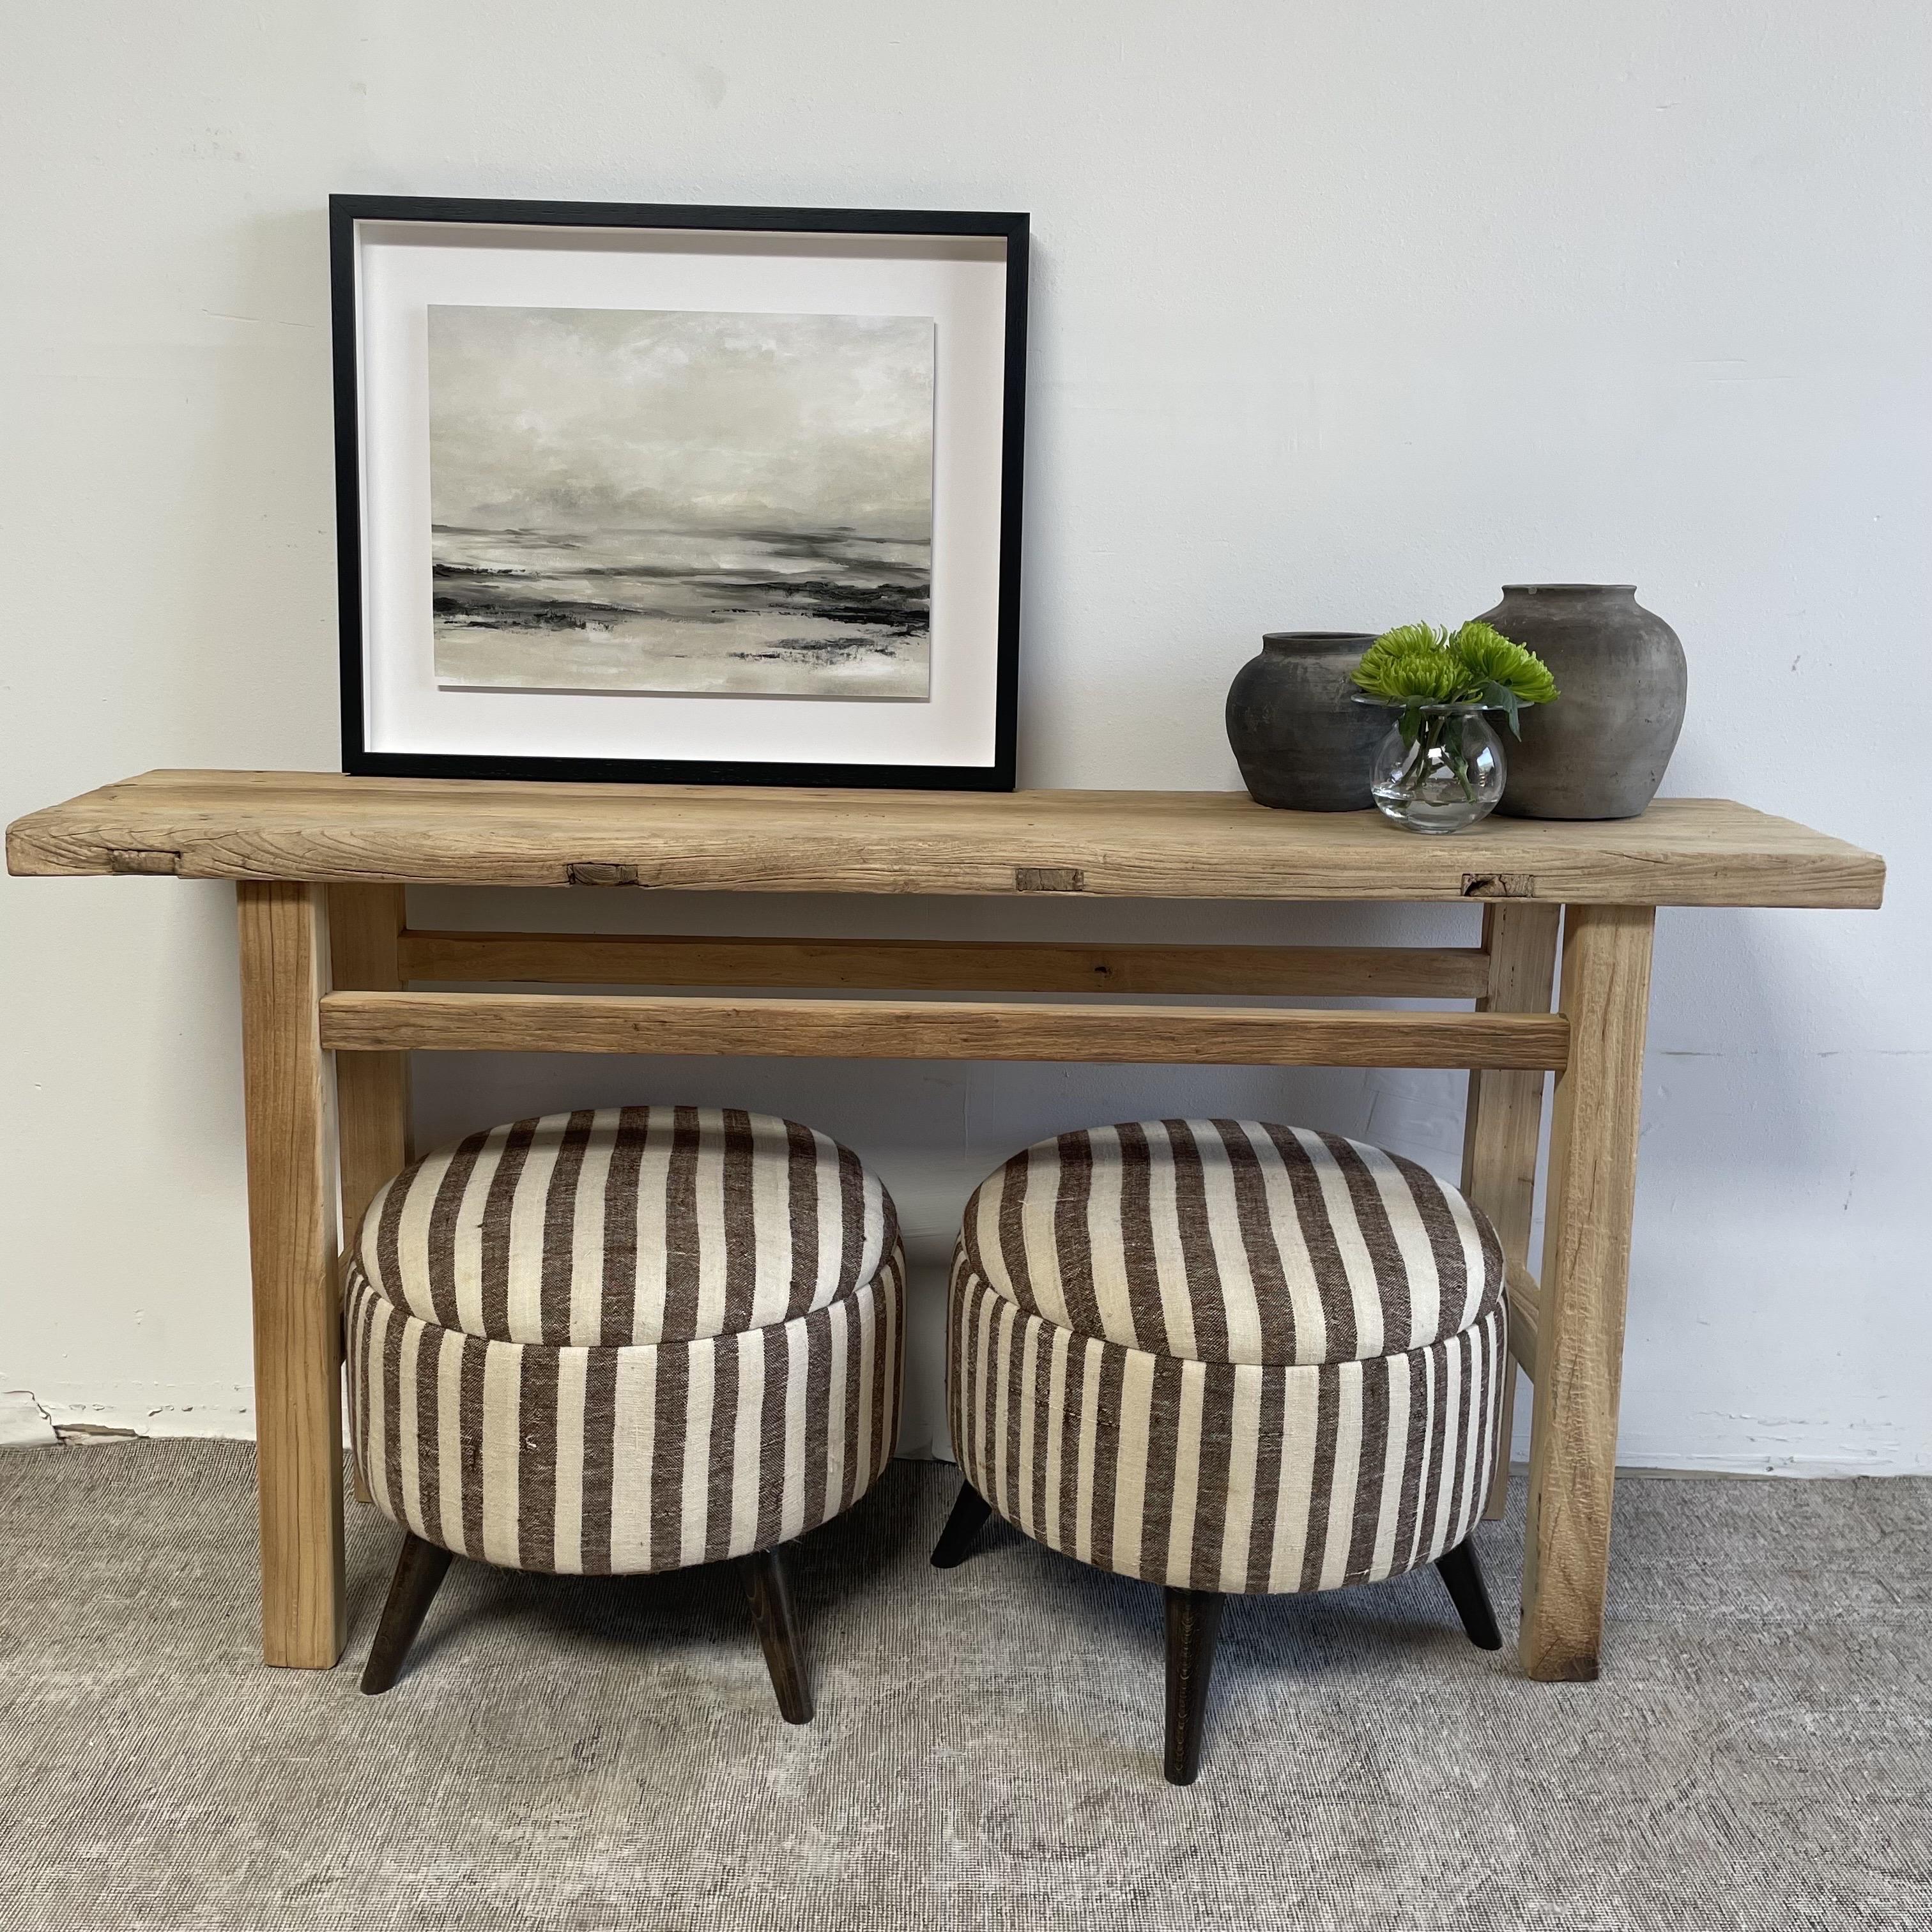 Vintage Antique Elm Wood Console Table
Made from Vintage reclaimed elm wood. Beautiful antique patina, with weathering and age, these are solid and sturdy ready for daily use, use as a entry table, sofa table or console in a dining room.  Great in a